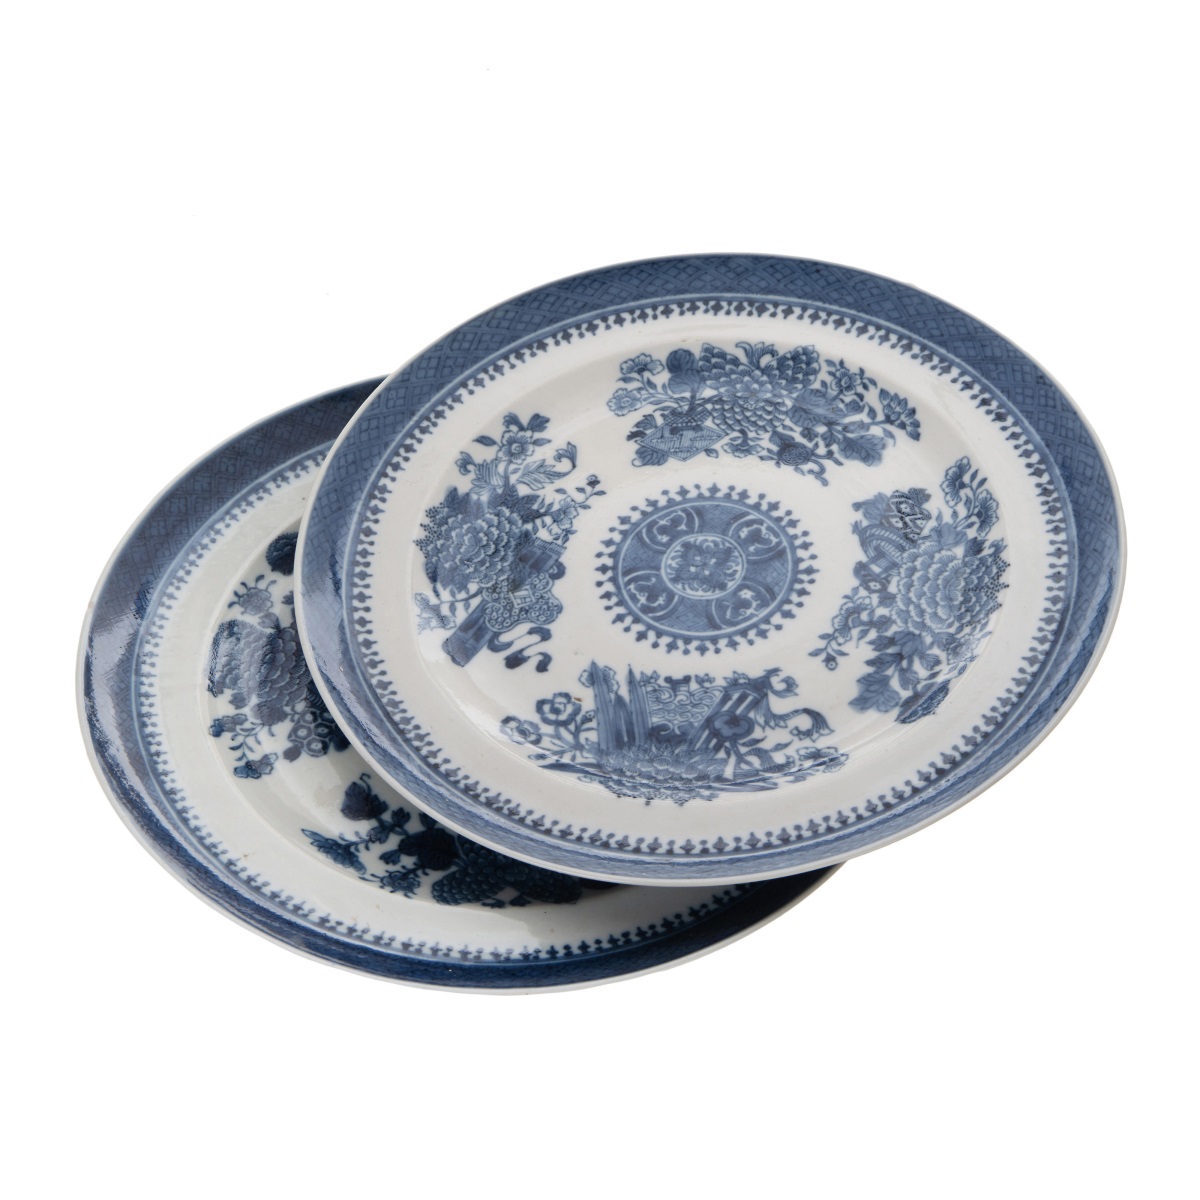 PAIR OF CHINESE BLUE AND WHITE PLATES,QING DYNASTY - Image 2 of 11